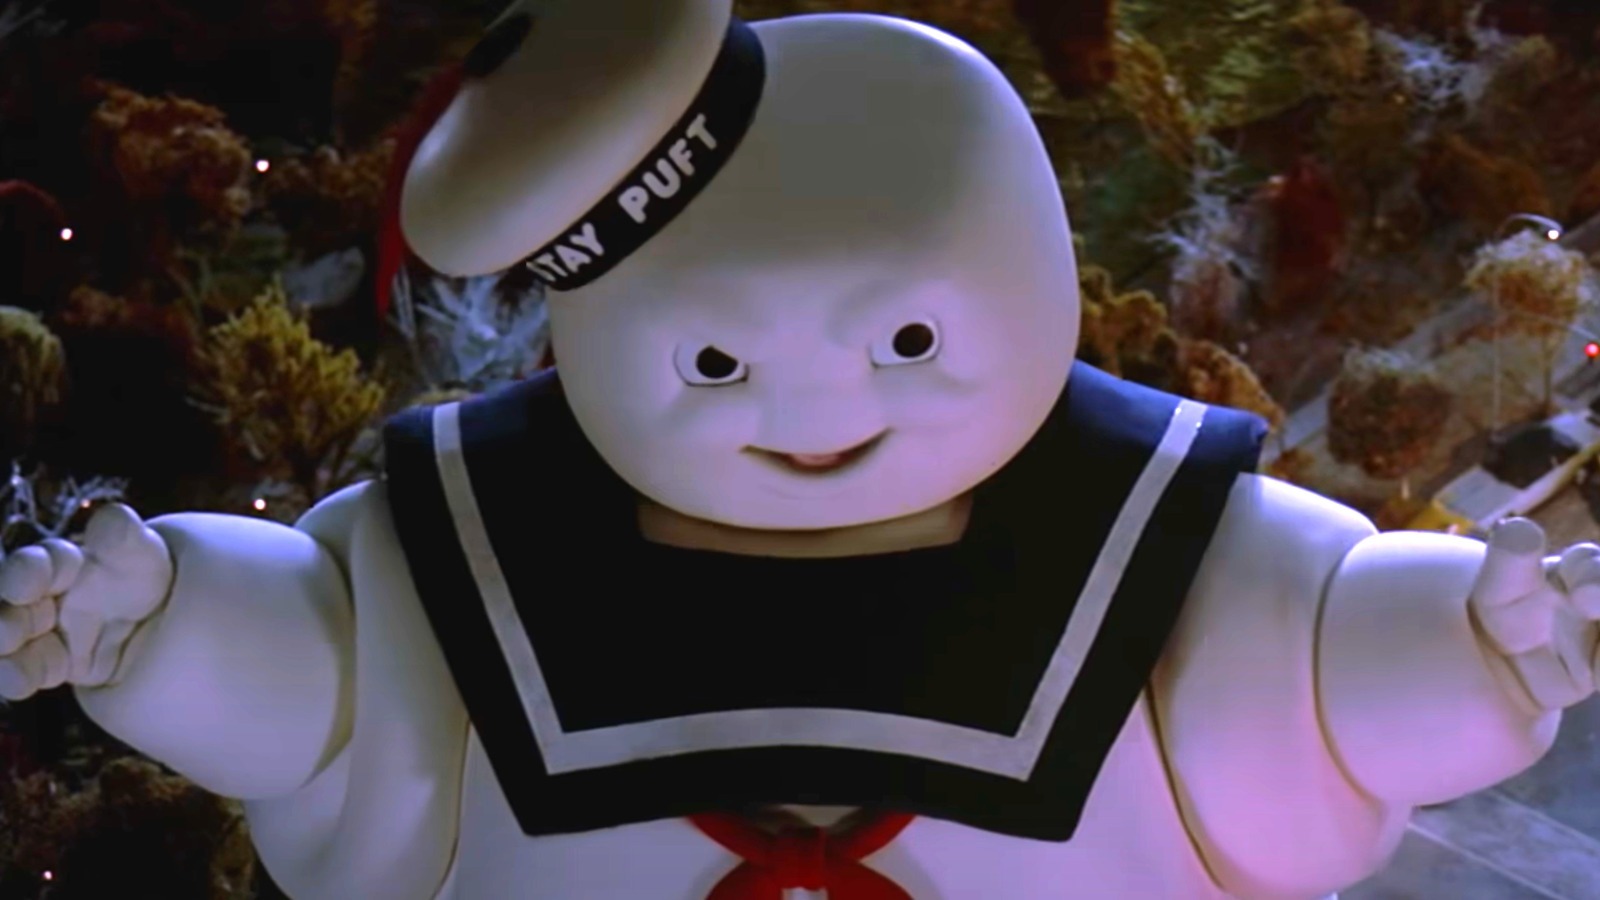 Ghostbusters Fans Agree The Marshmallow Mans Special Effects Still Hold Up 9138